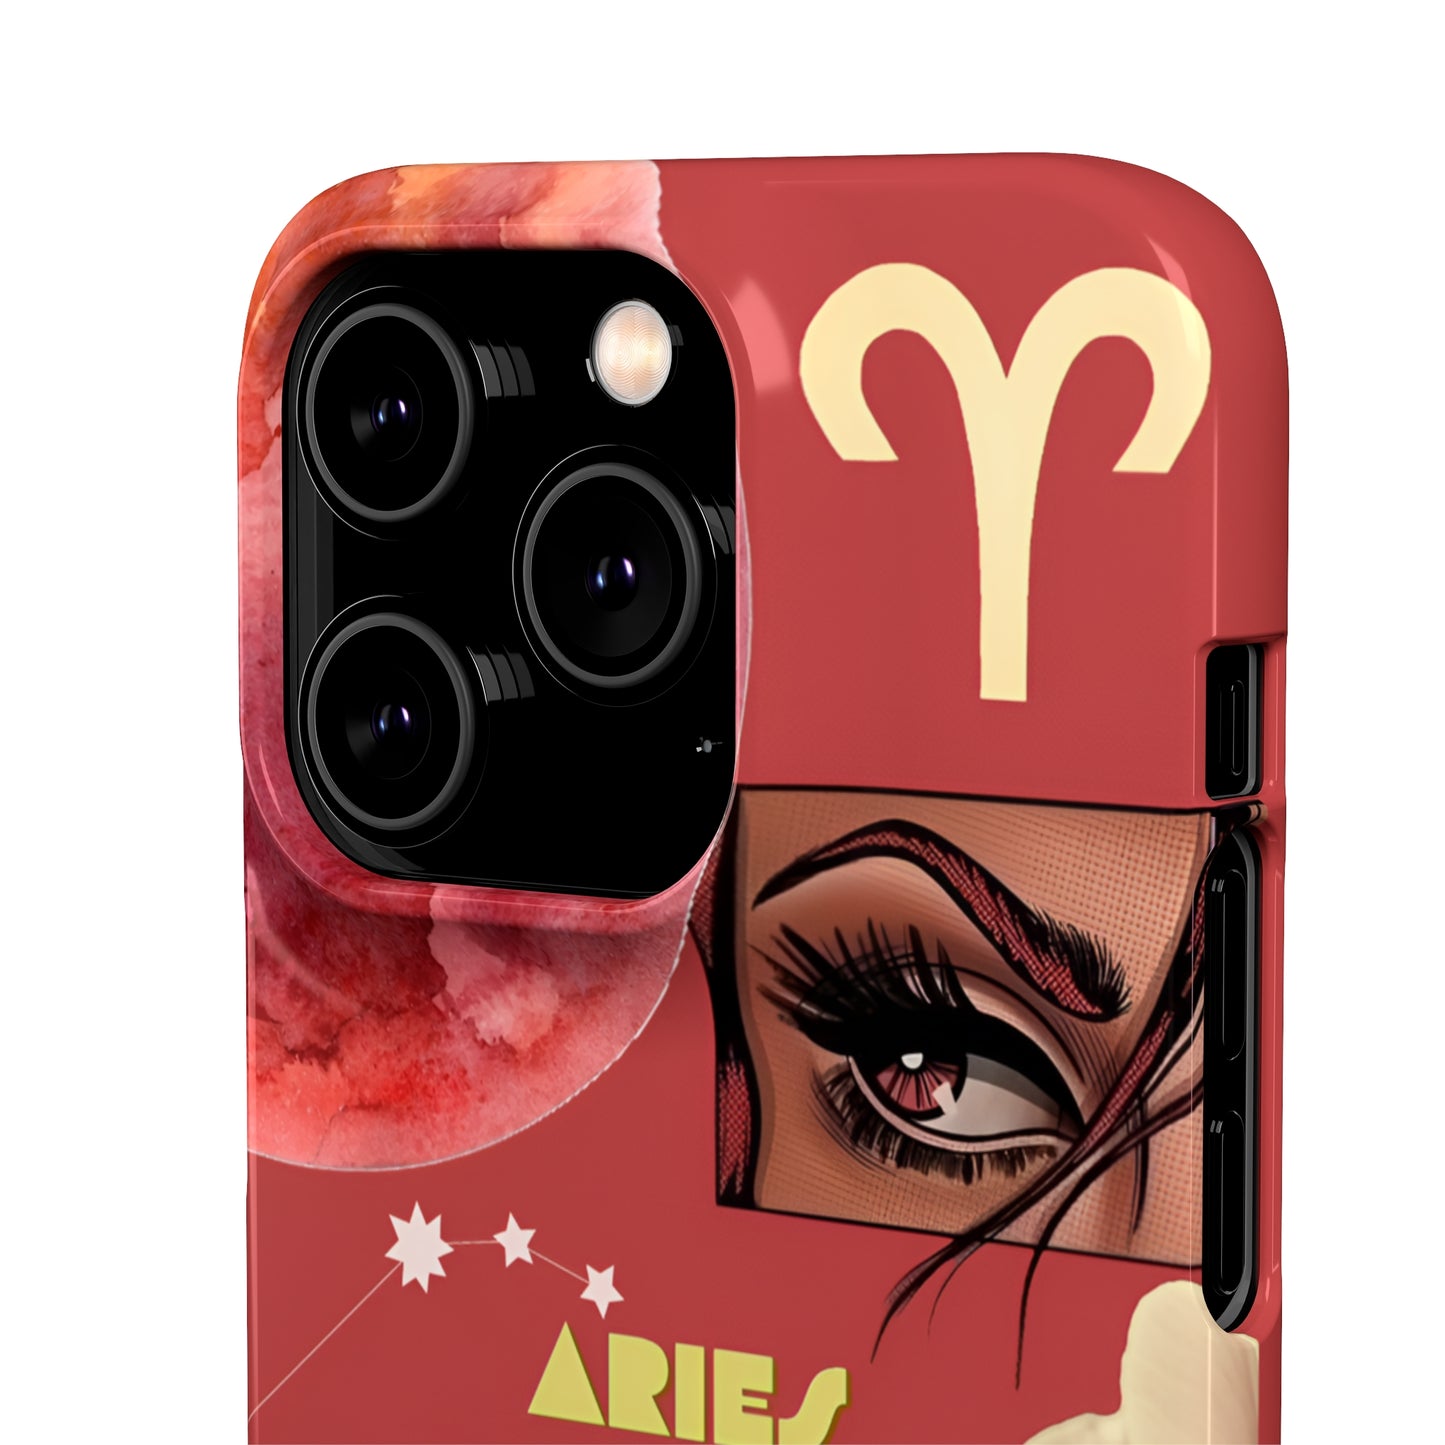 ARIES Apple Phone Cases ASTRA-LOGY